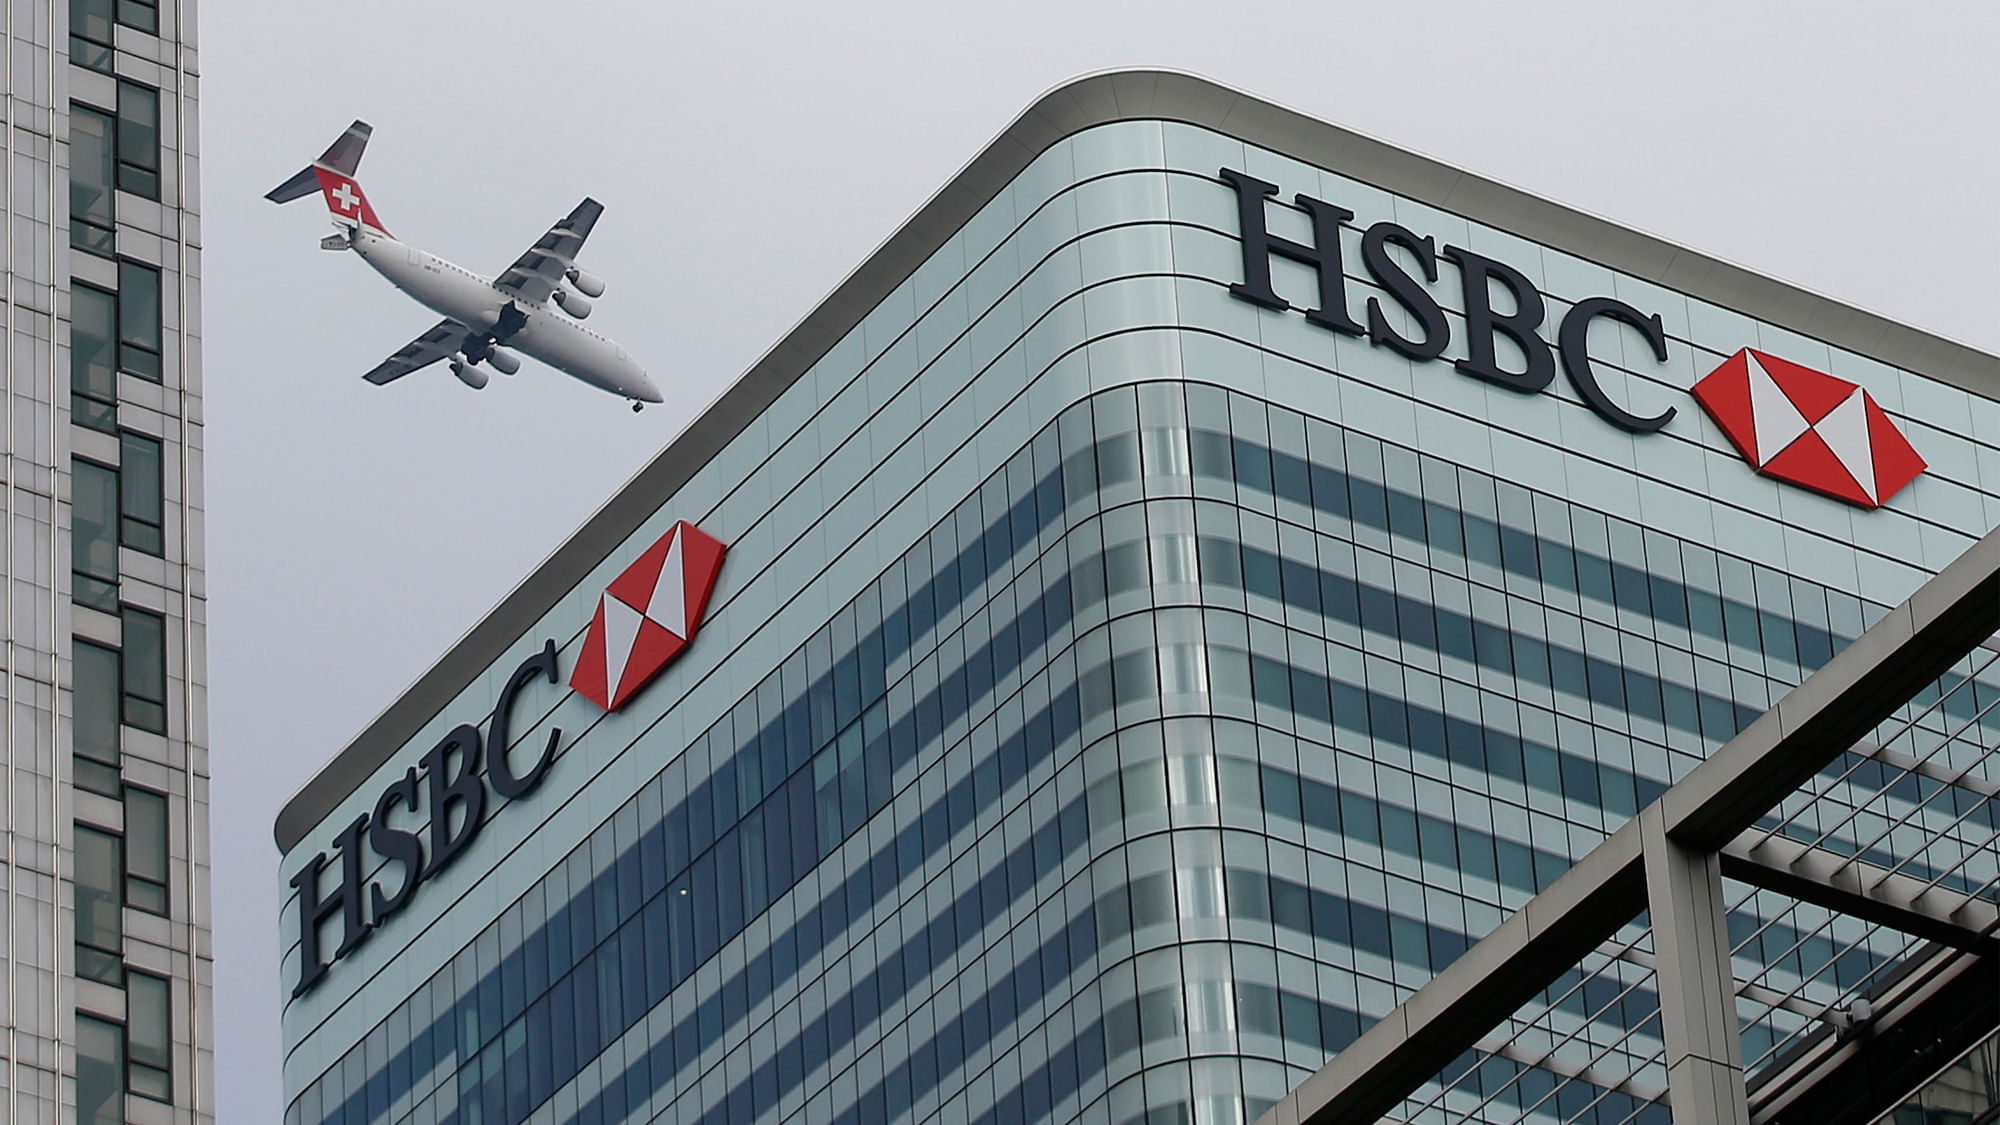 

A Swiss International aircraft flies past the HSBC headquarters building in the Canary Wharf financial district in east London. (Photo: Reuters)